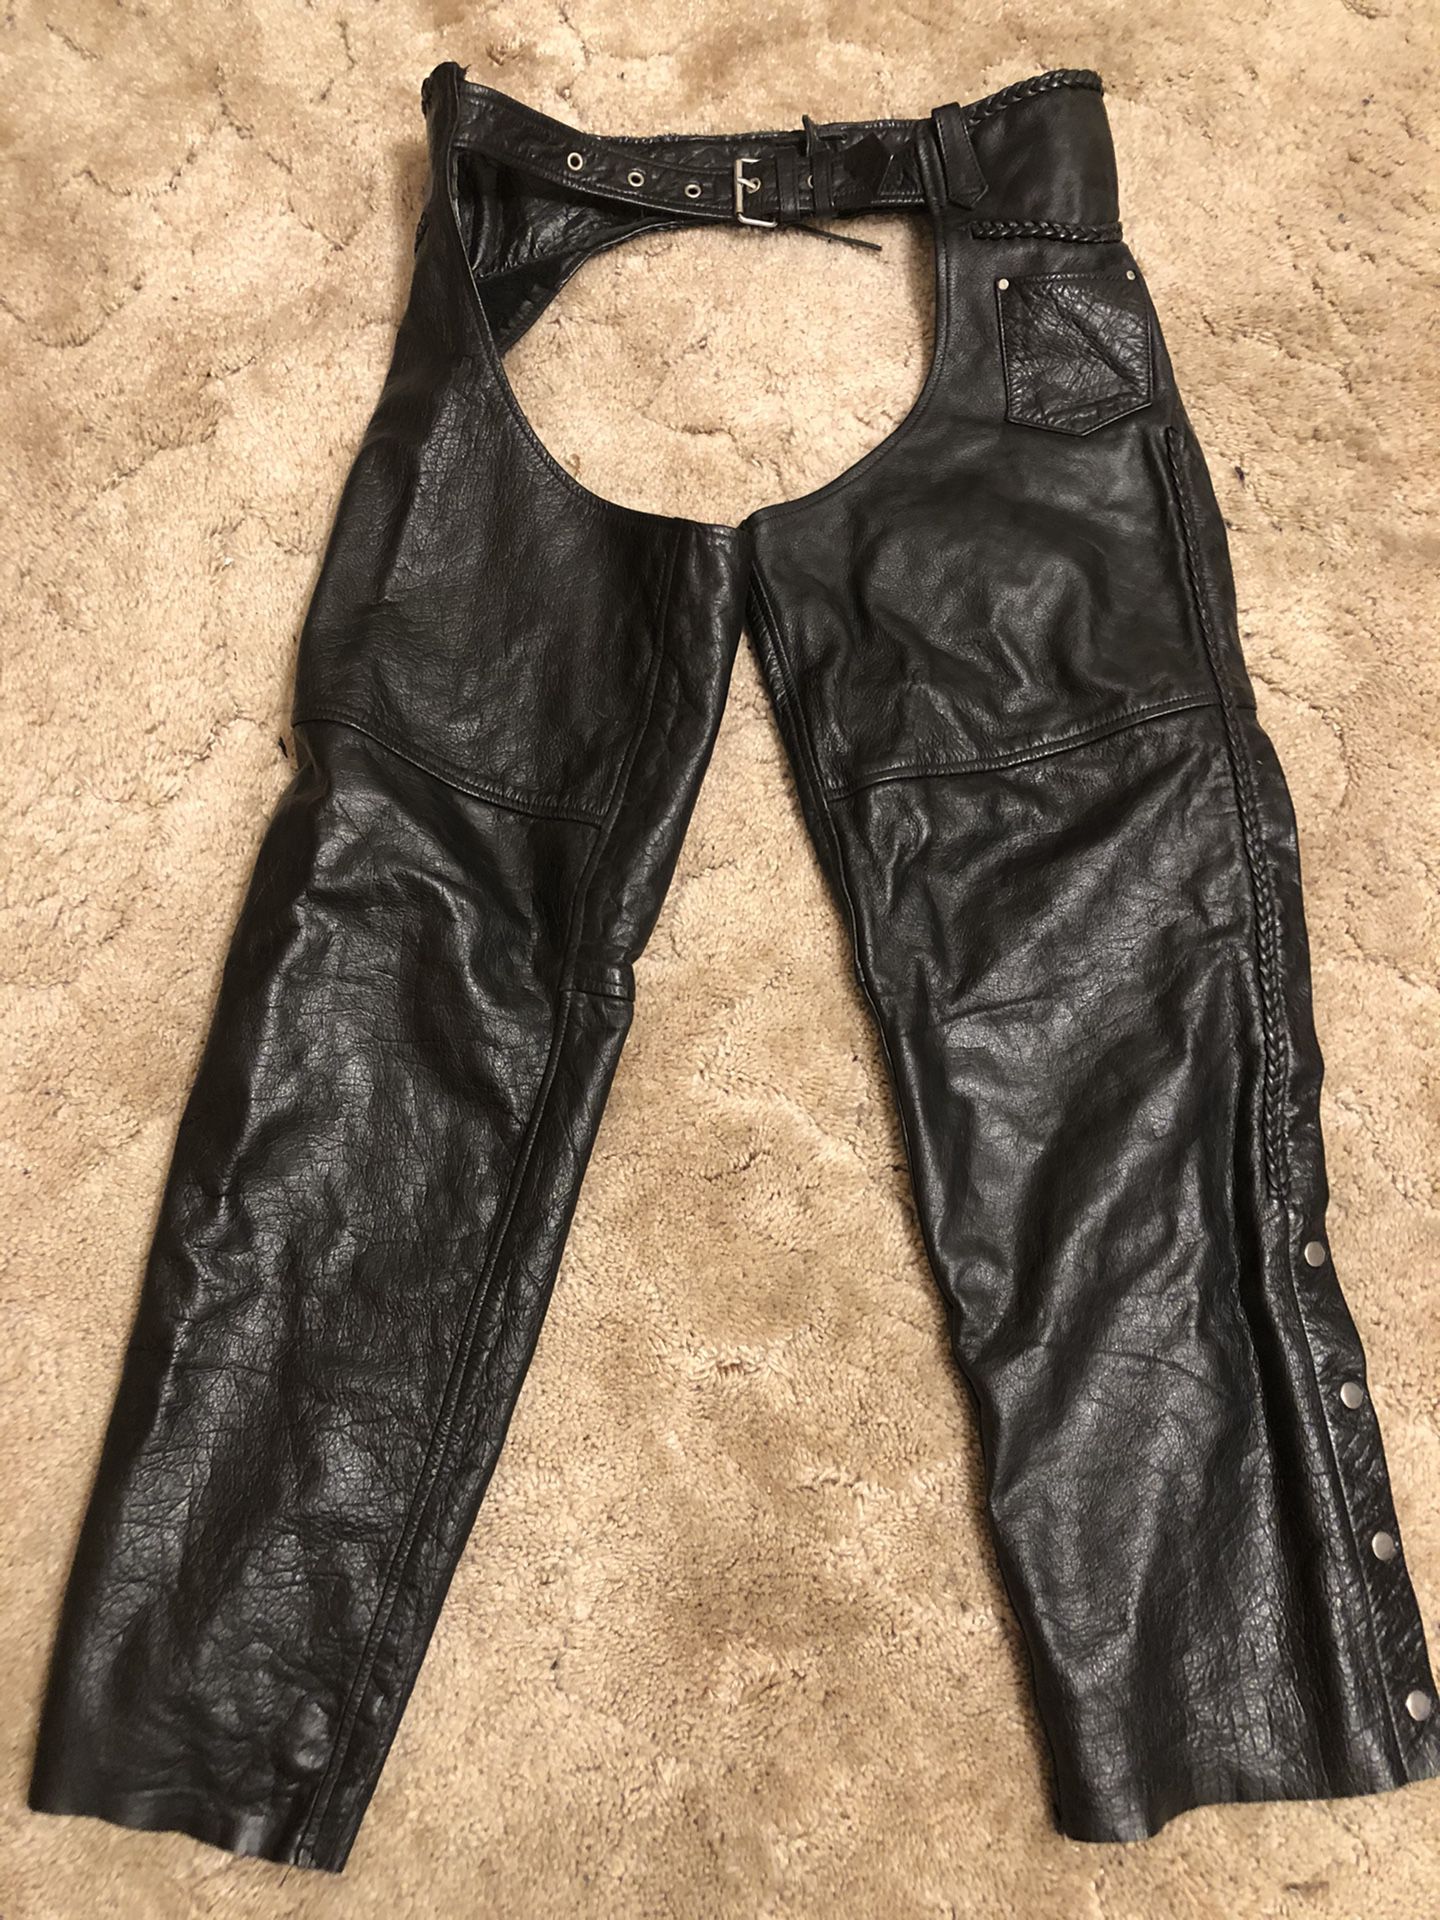 HARLEY DAVIDSON AUTHENTIC LEATHER RIDING CHAPS SIZE XXL